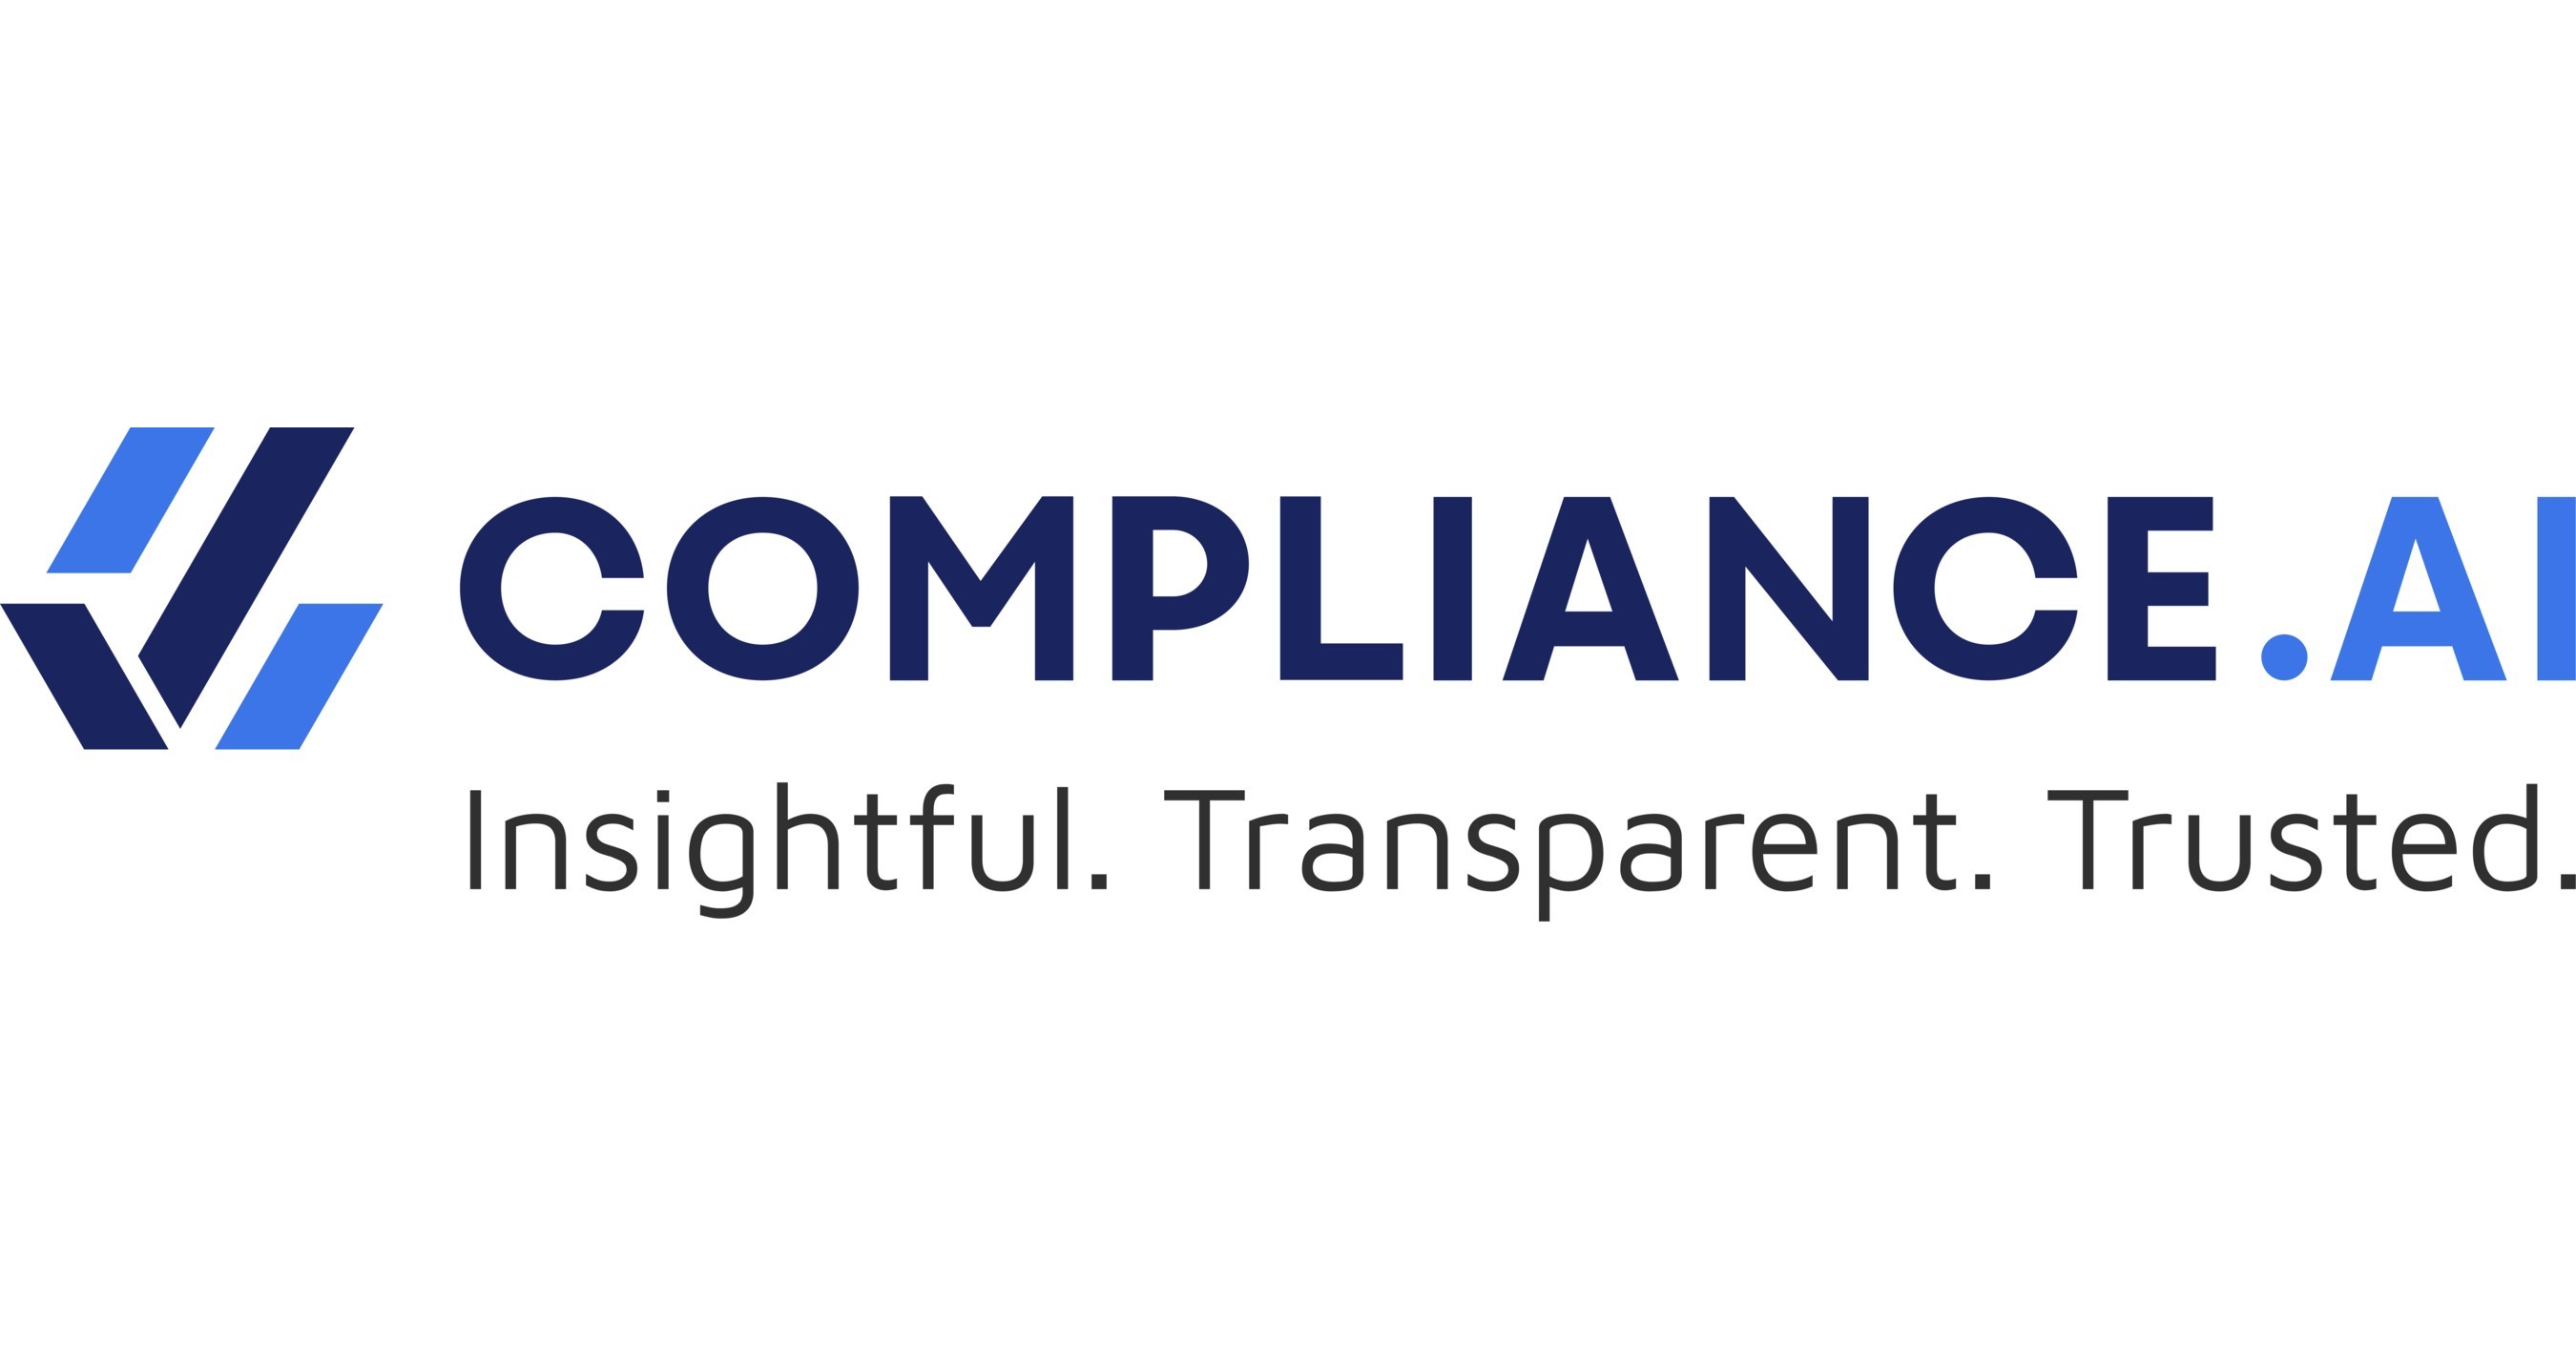 RegTech Pioneer, Compliance.ai Secures Series A Funding Fueling the Expansion of its Platform and Expert Advisory Board